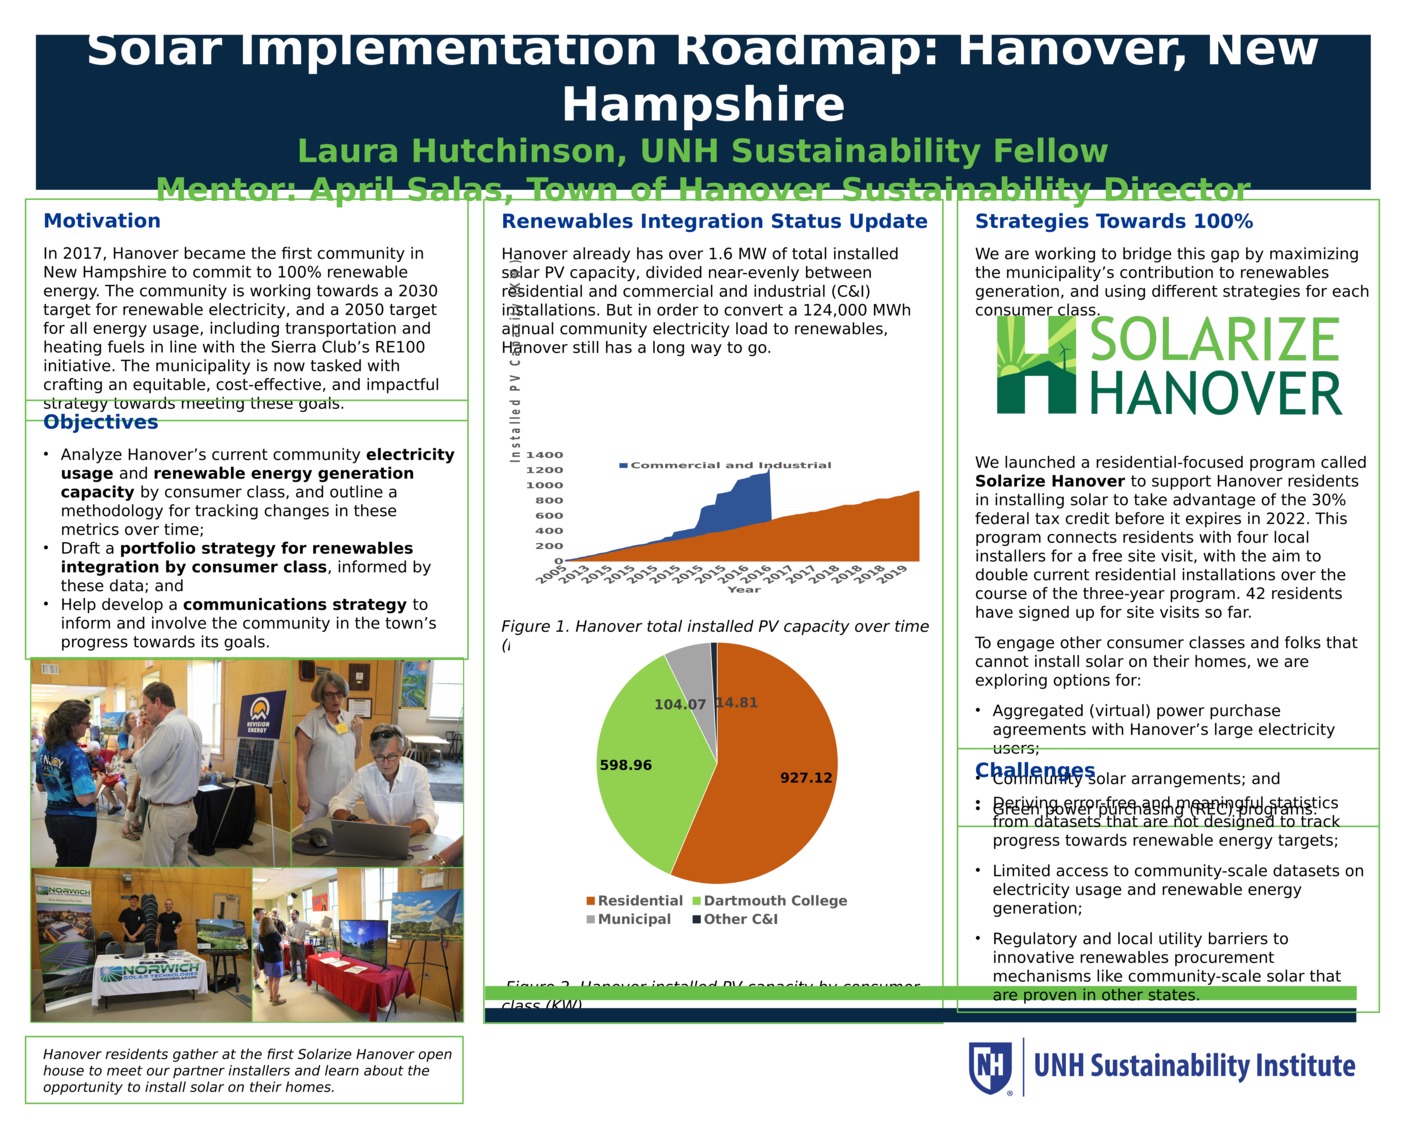 Solar Implementation Roadmap: Hanover, New Hampshire by lh1148